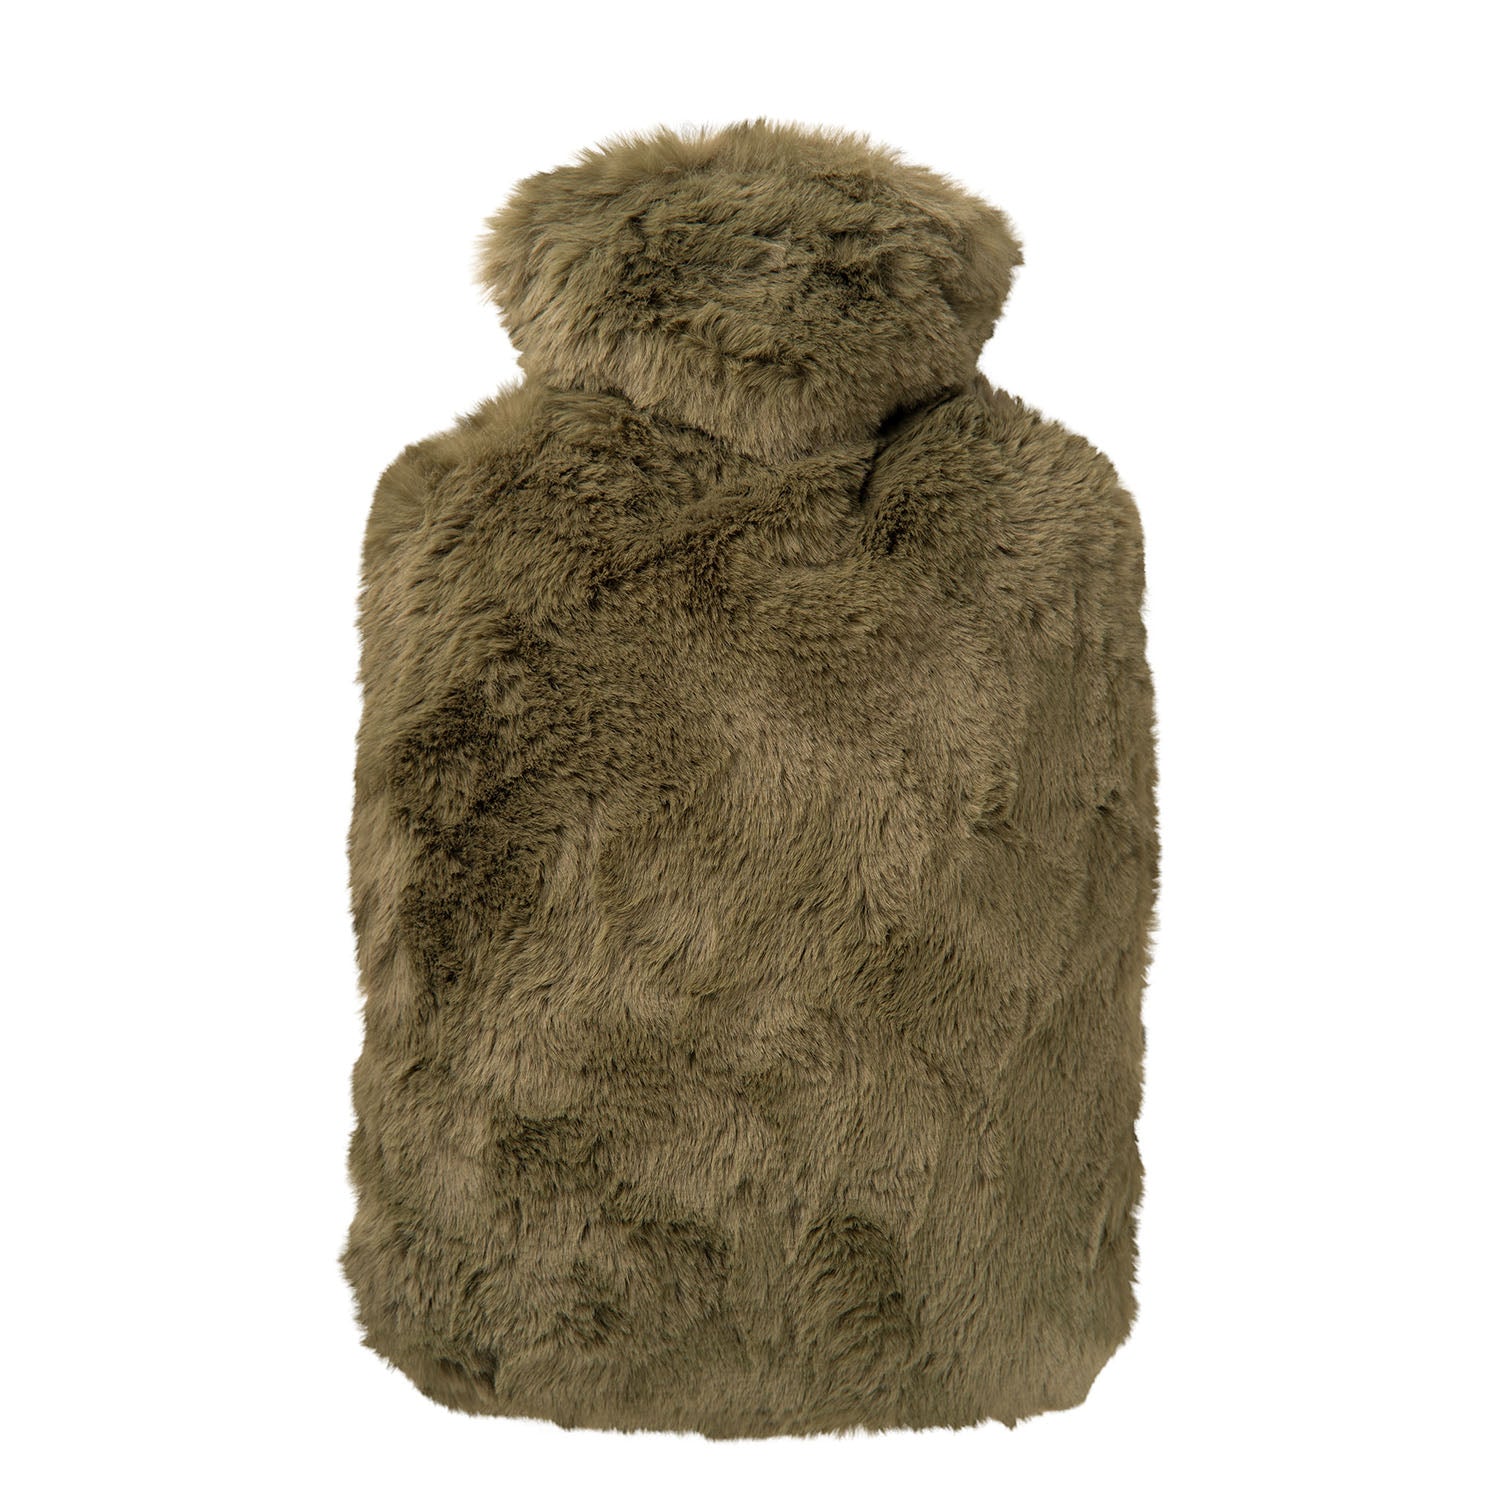 1.8 Litre Hot Water Bottle with Moss Green Long Hair Luxury Faux Fur Cover (rubberless)